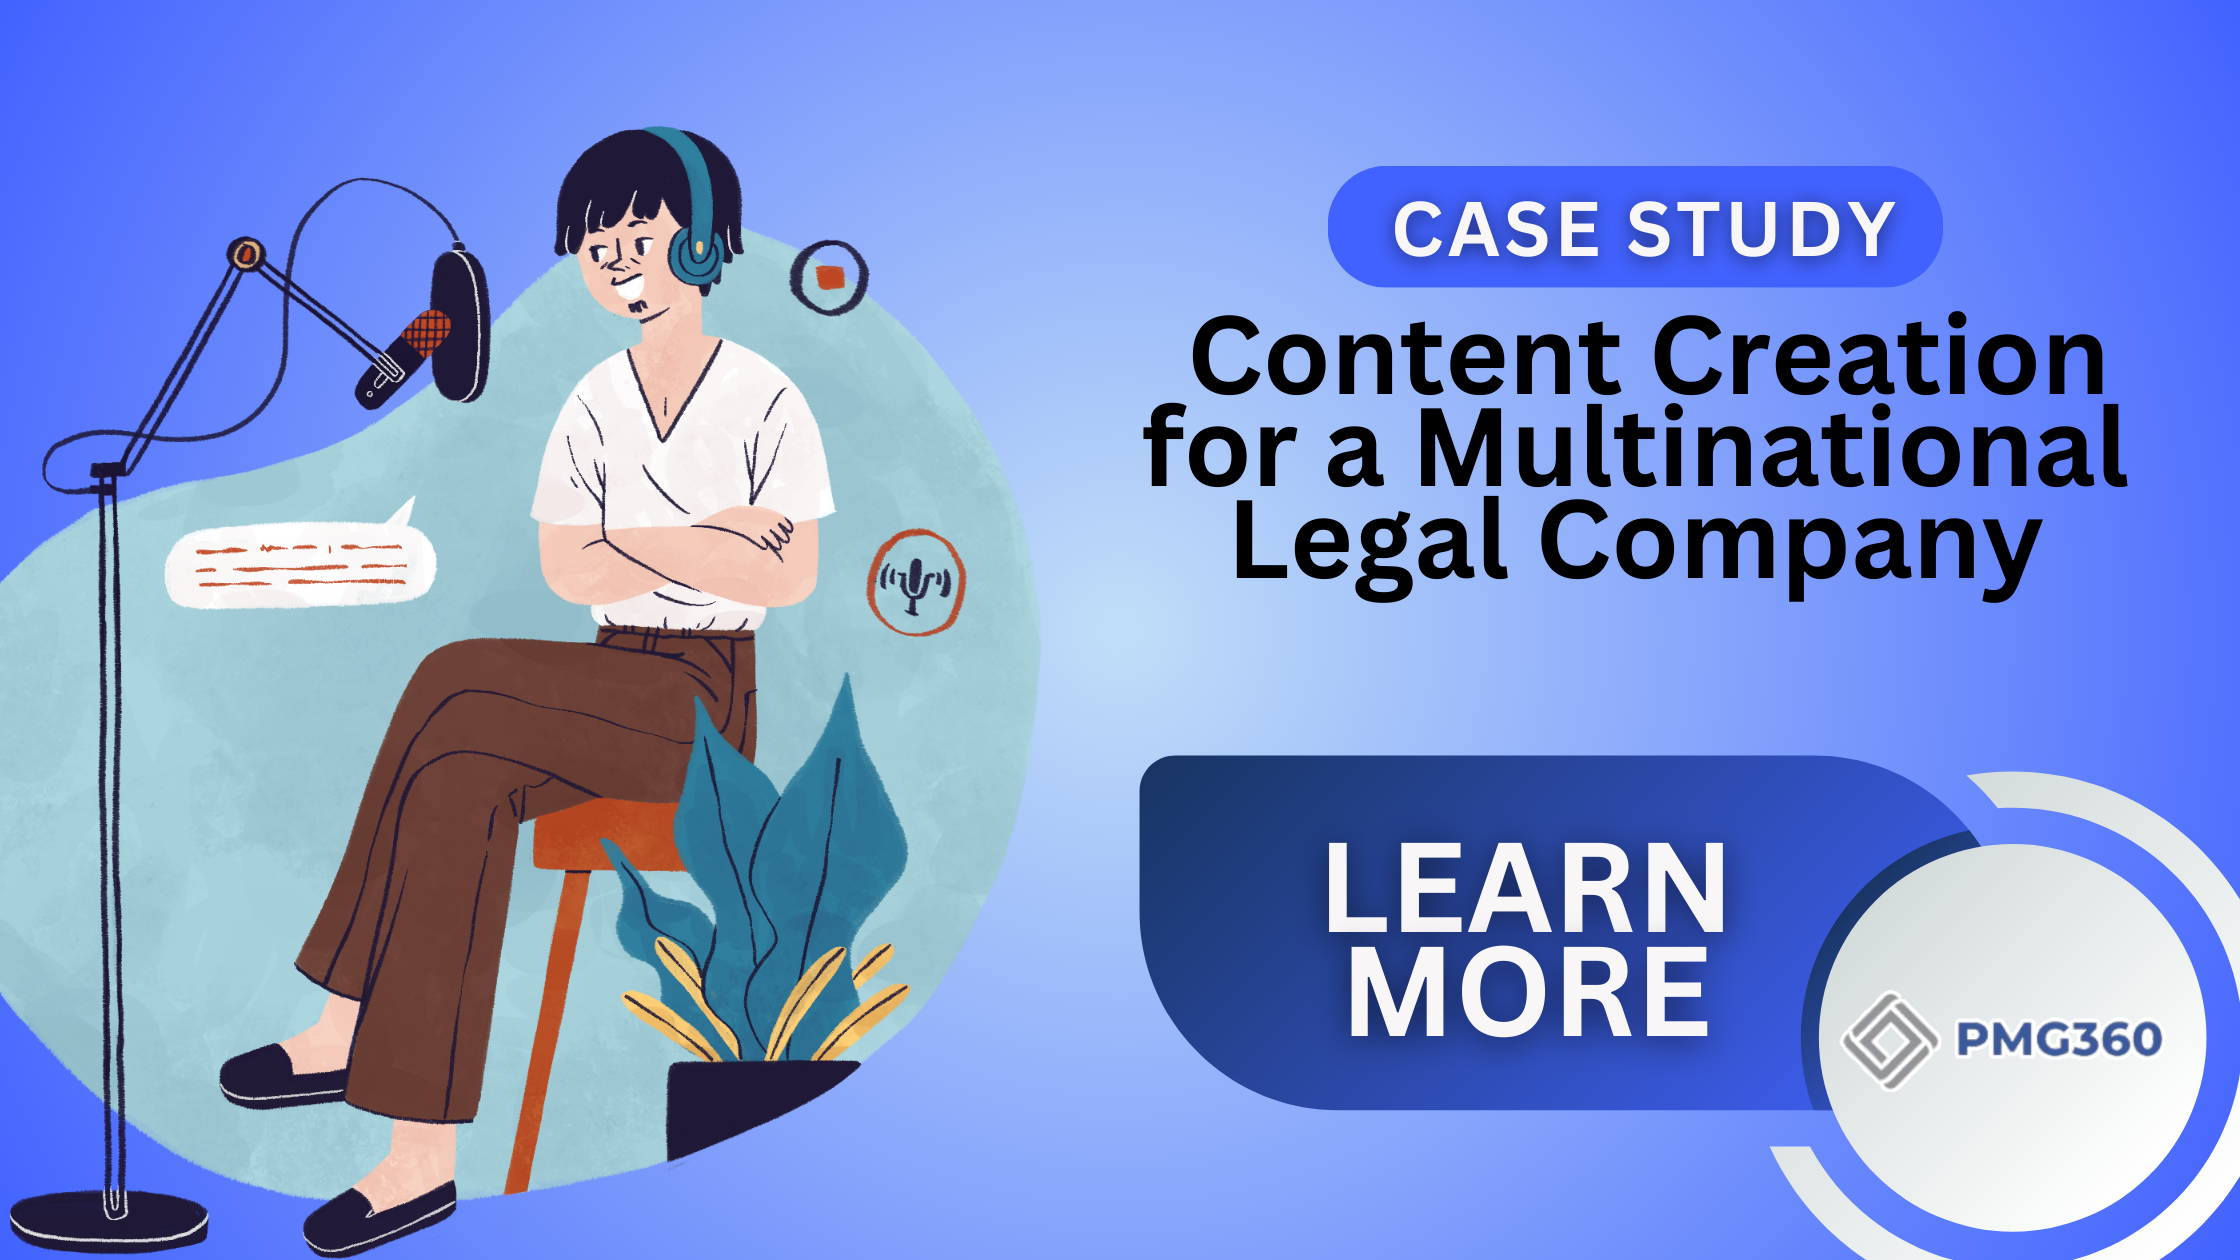 Content Creation for a Multinational Legal Company